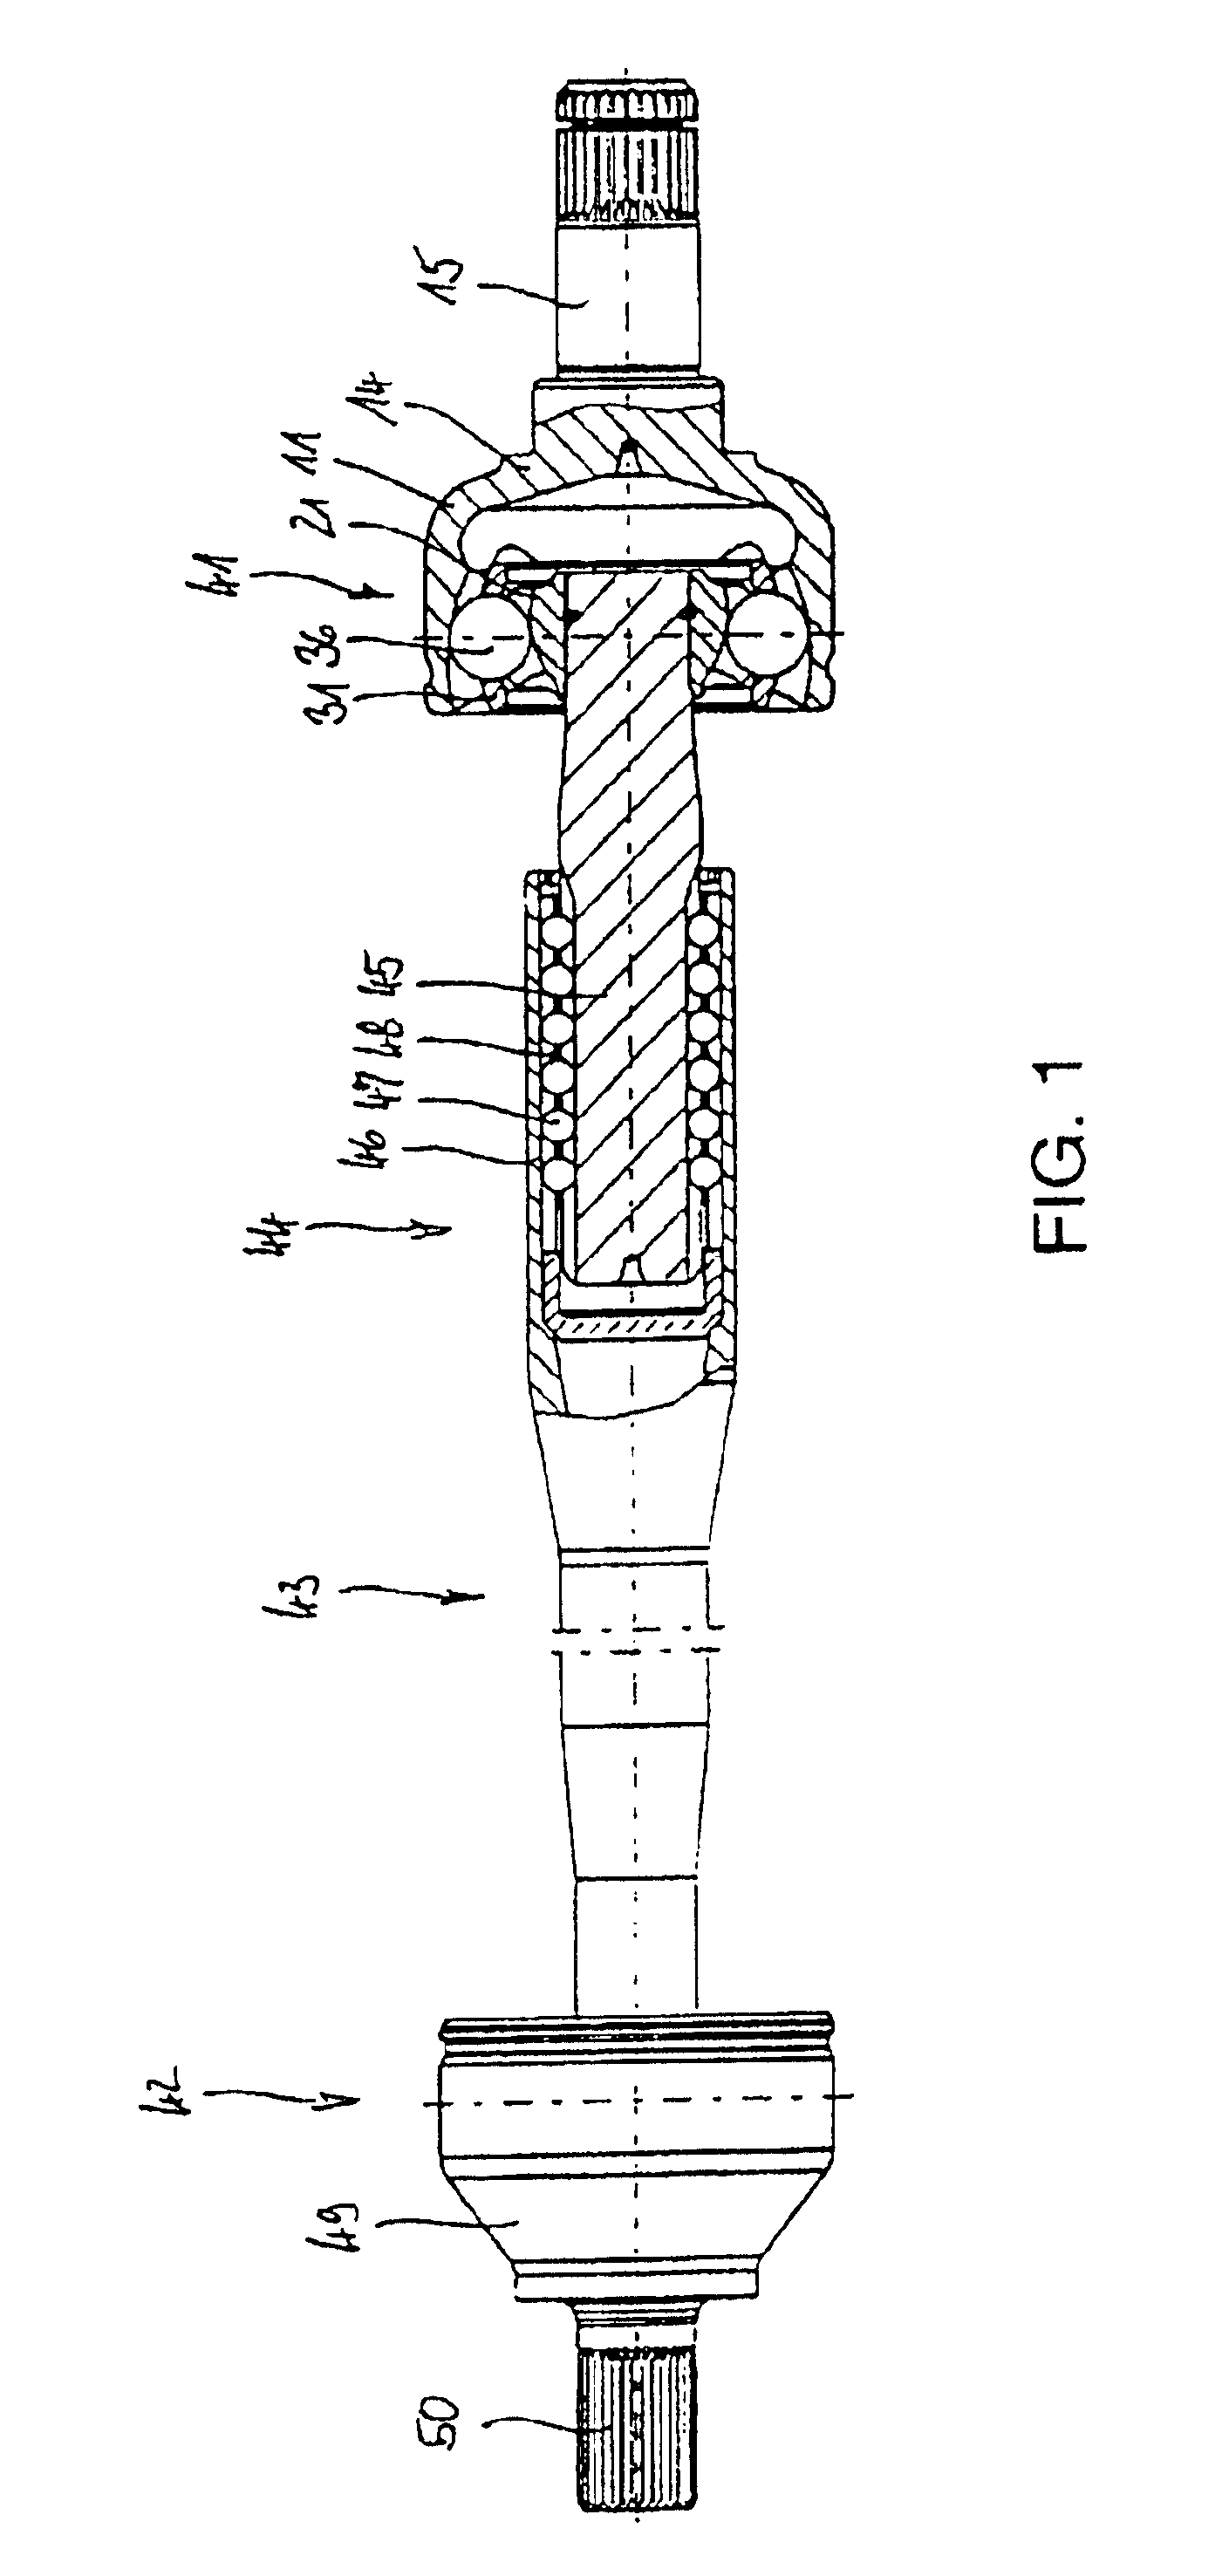 Driveshaft with counter-track joint